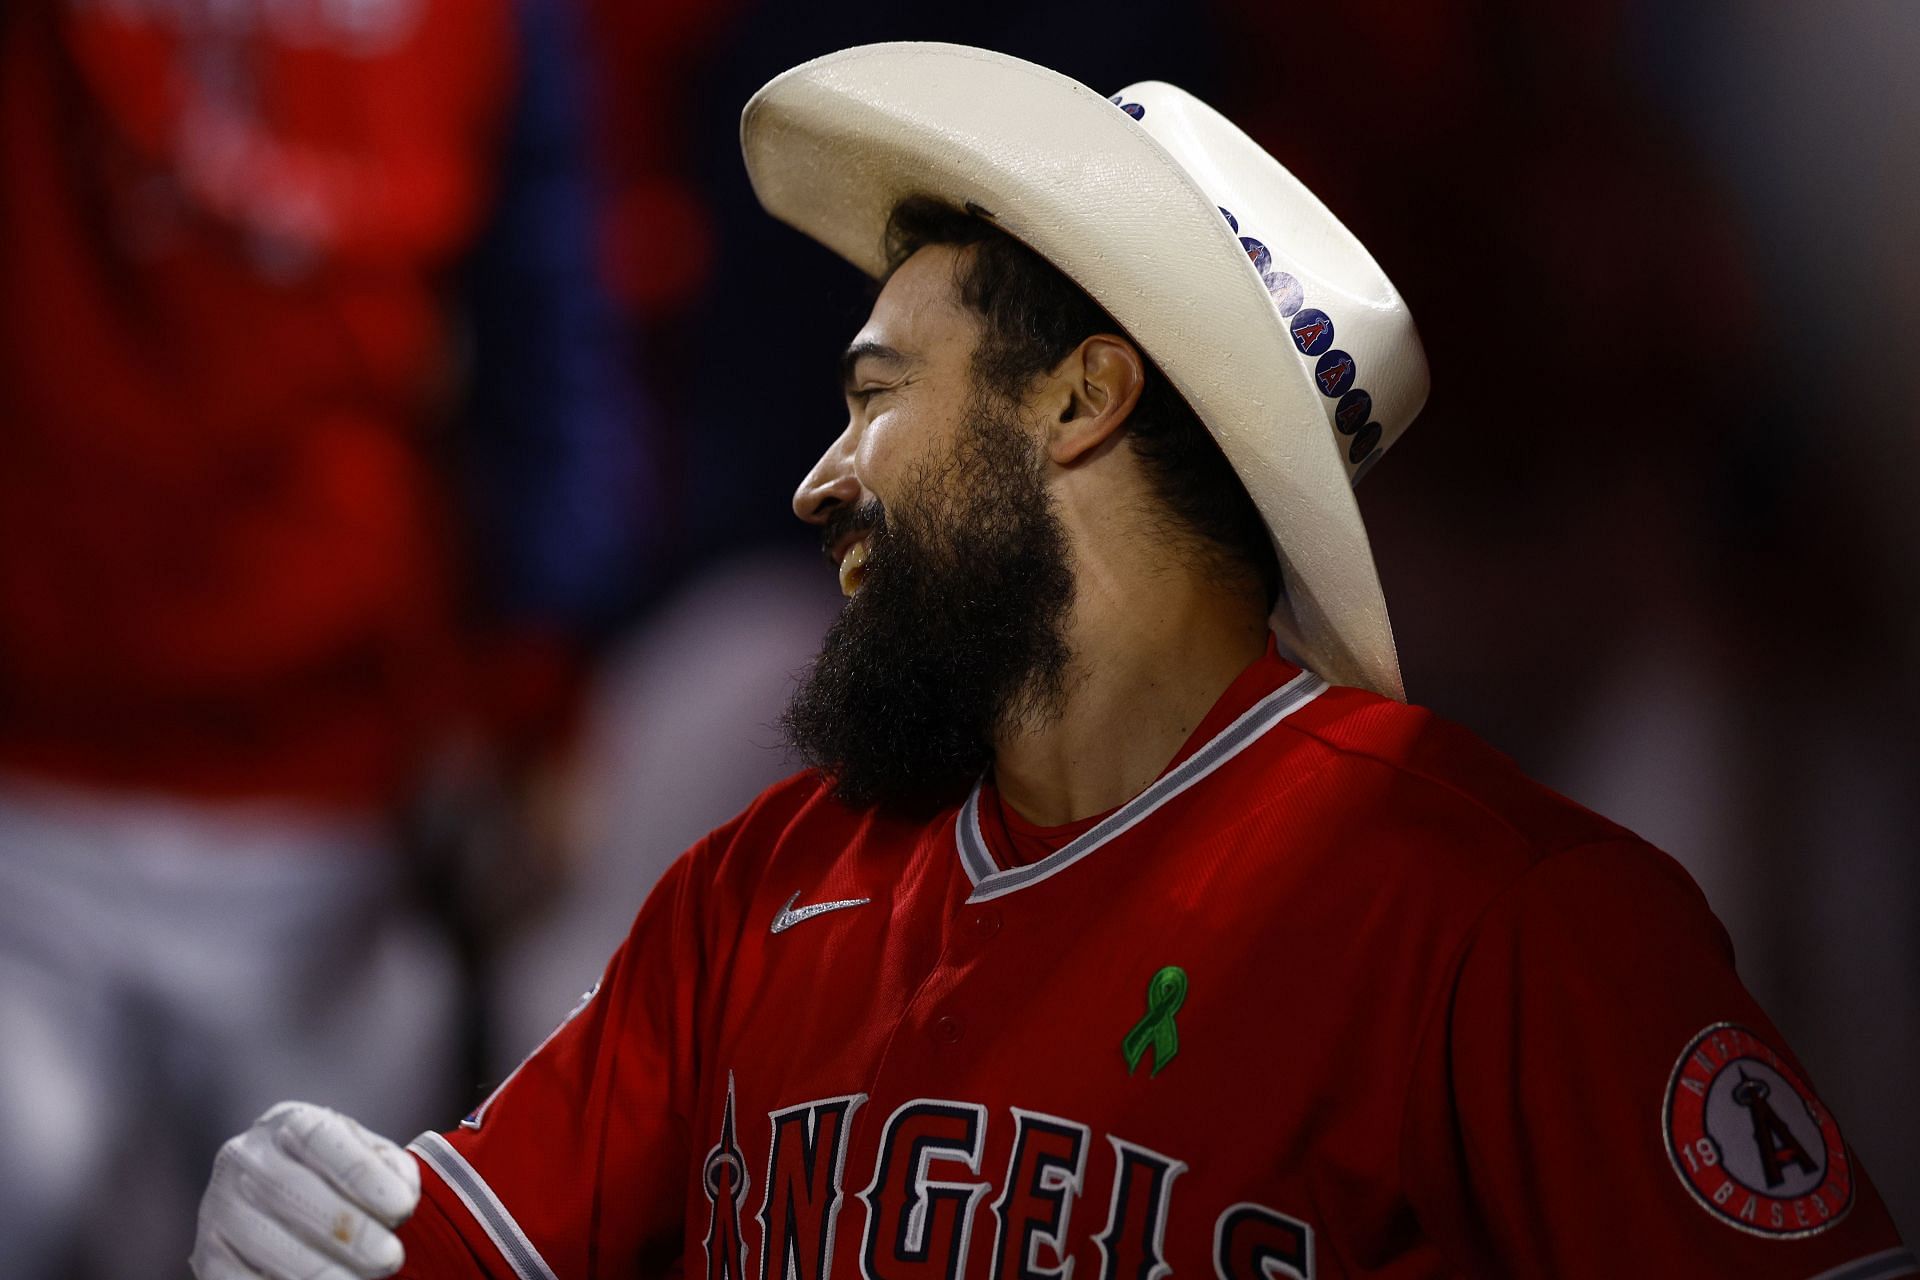 Angels' Anthony Rendon suspended for altercation with fan